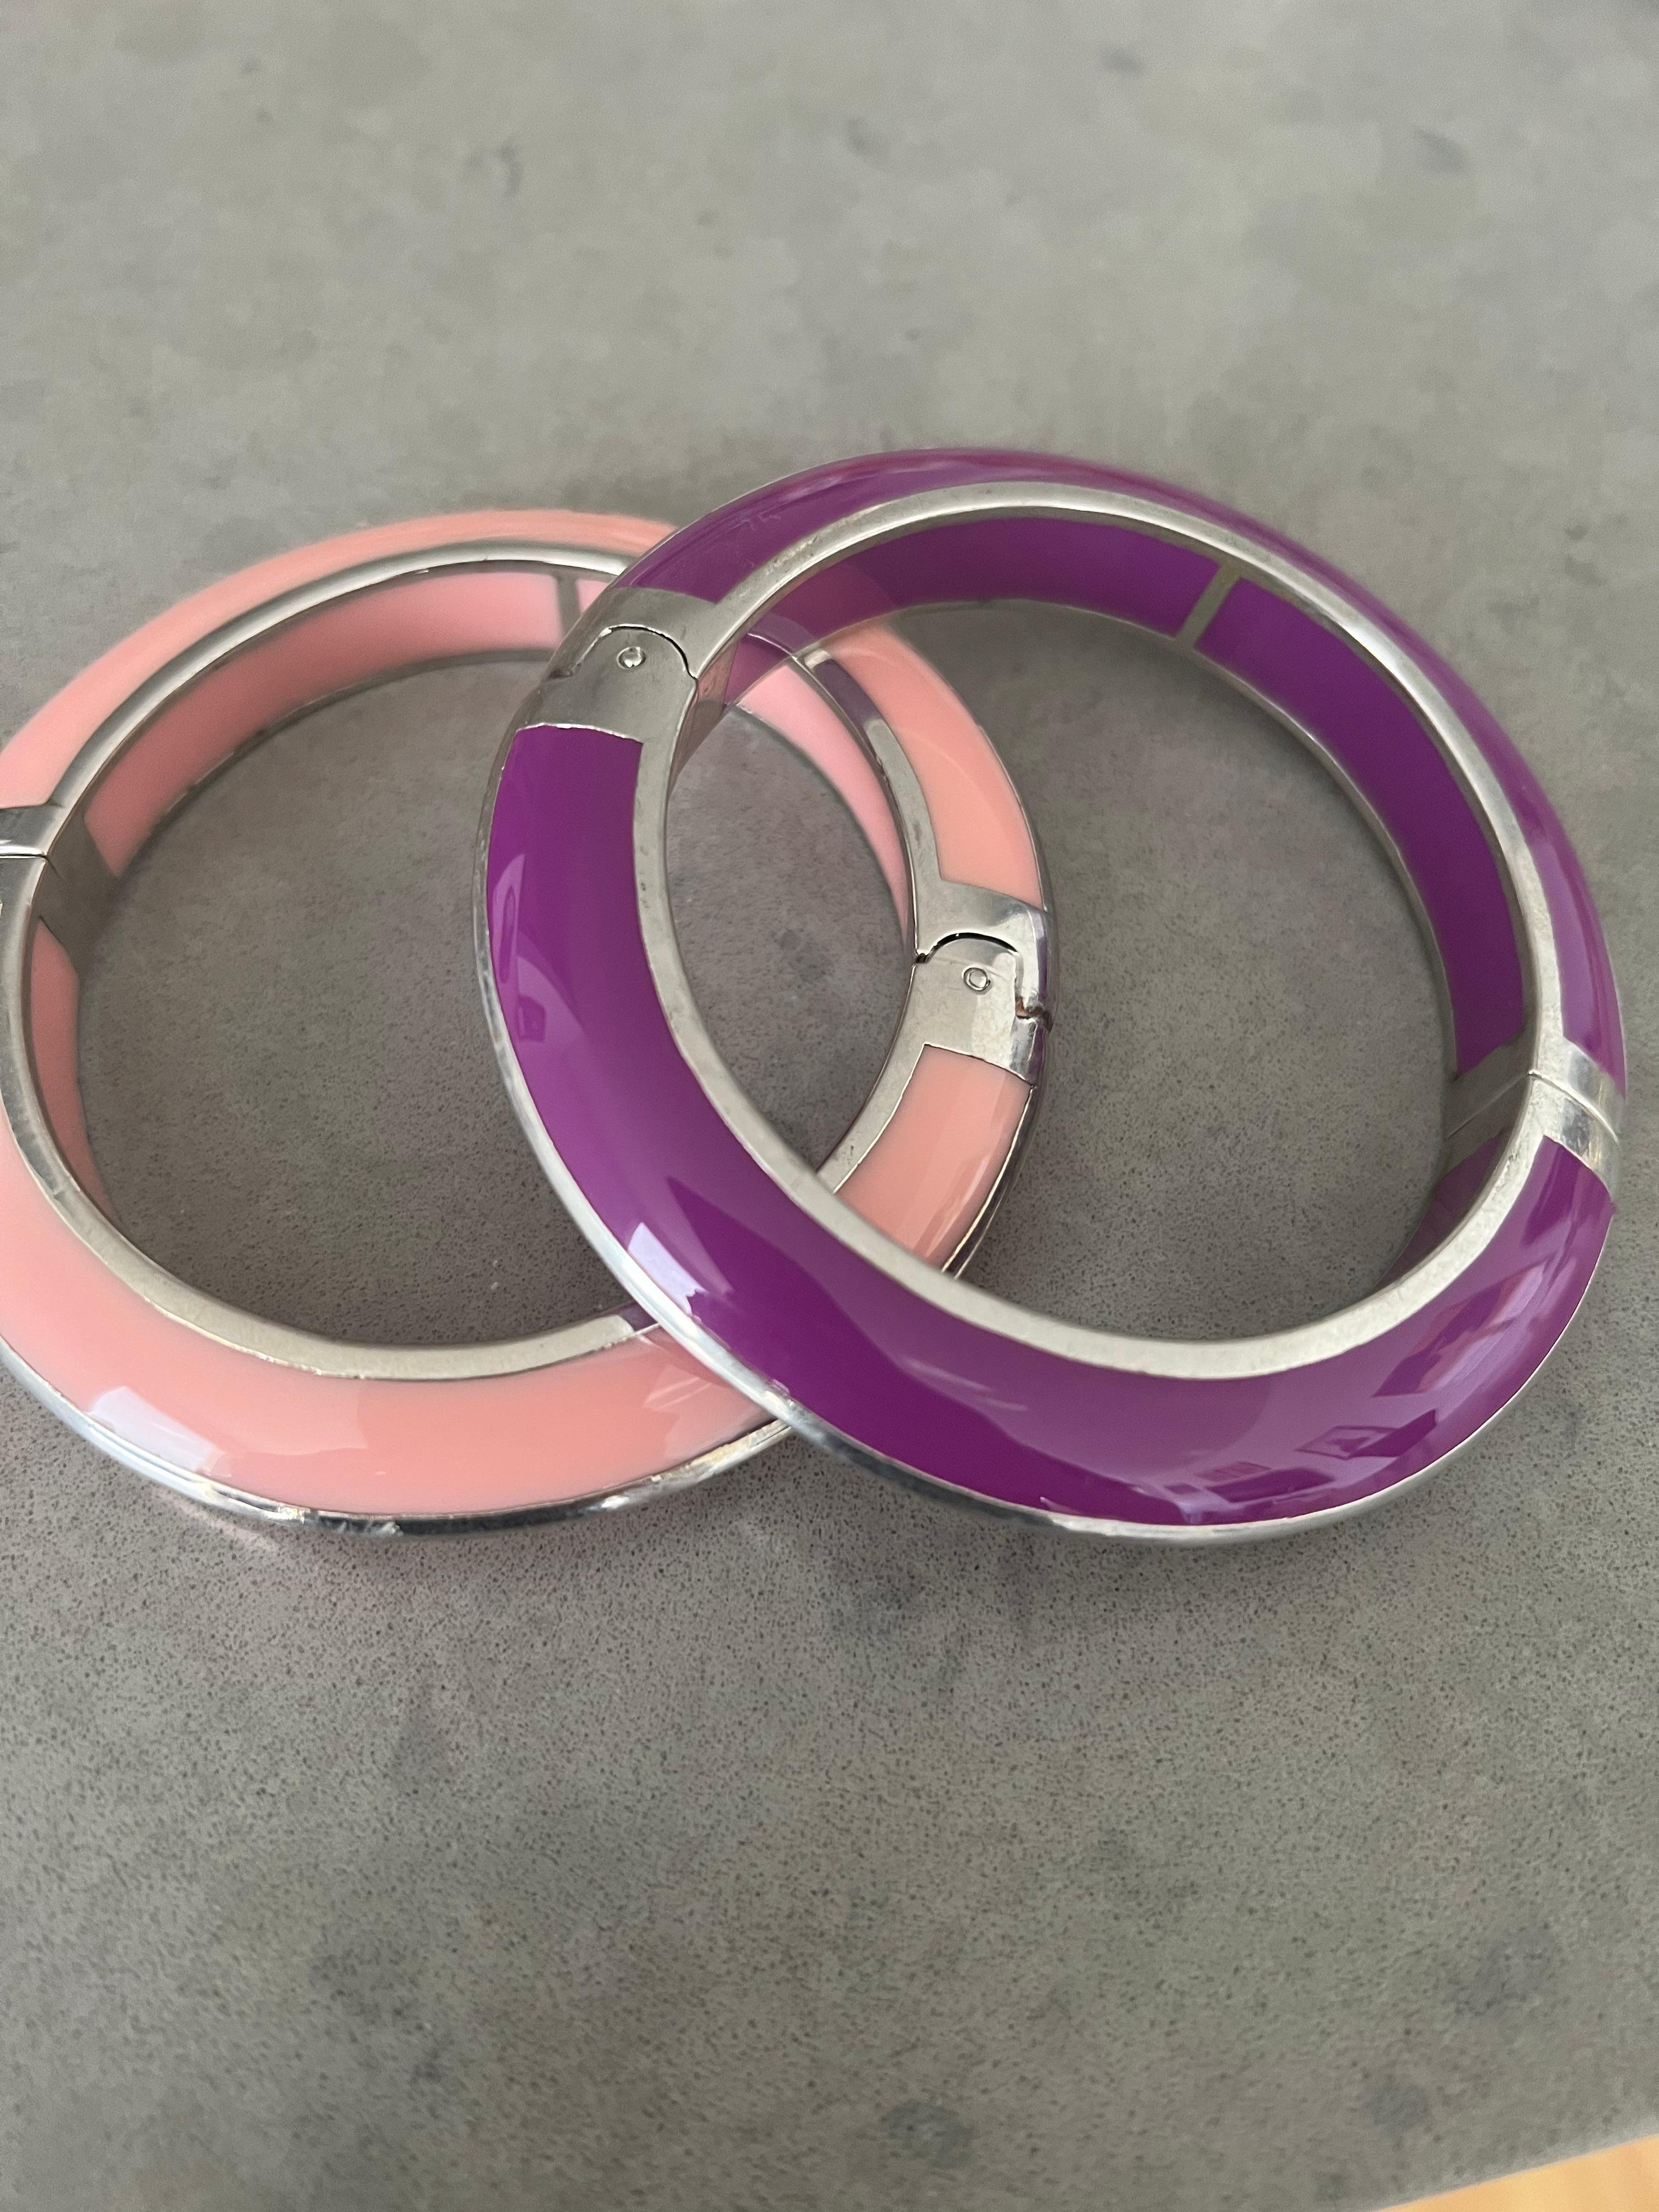 Miriam Salat Resin bangle 
This Miriam Salat bangle features Candy Pink color resin with sterling silver. 
The bangle is comfort fit and fantastic quality and is perfect for layering. 
Bangle is flexible to fit your hand.  With magnetic closure.